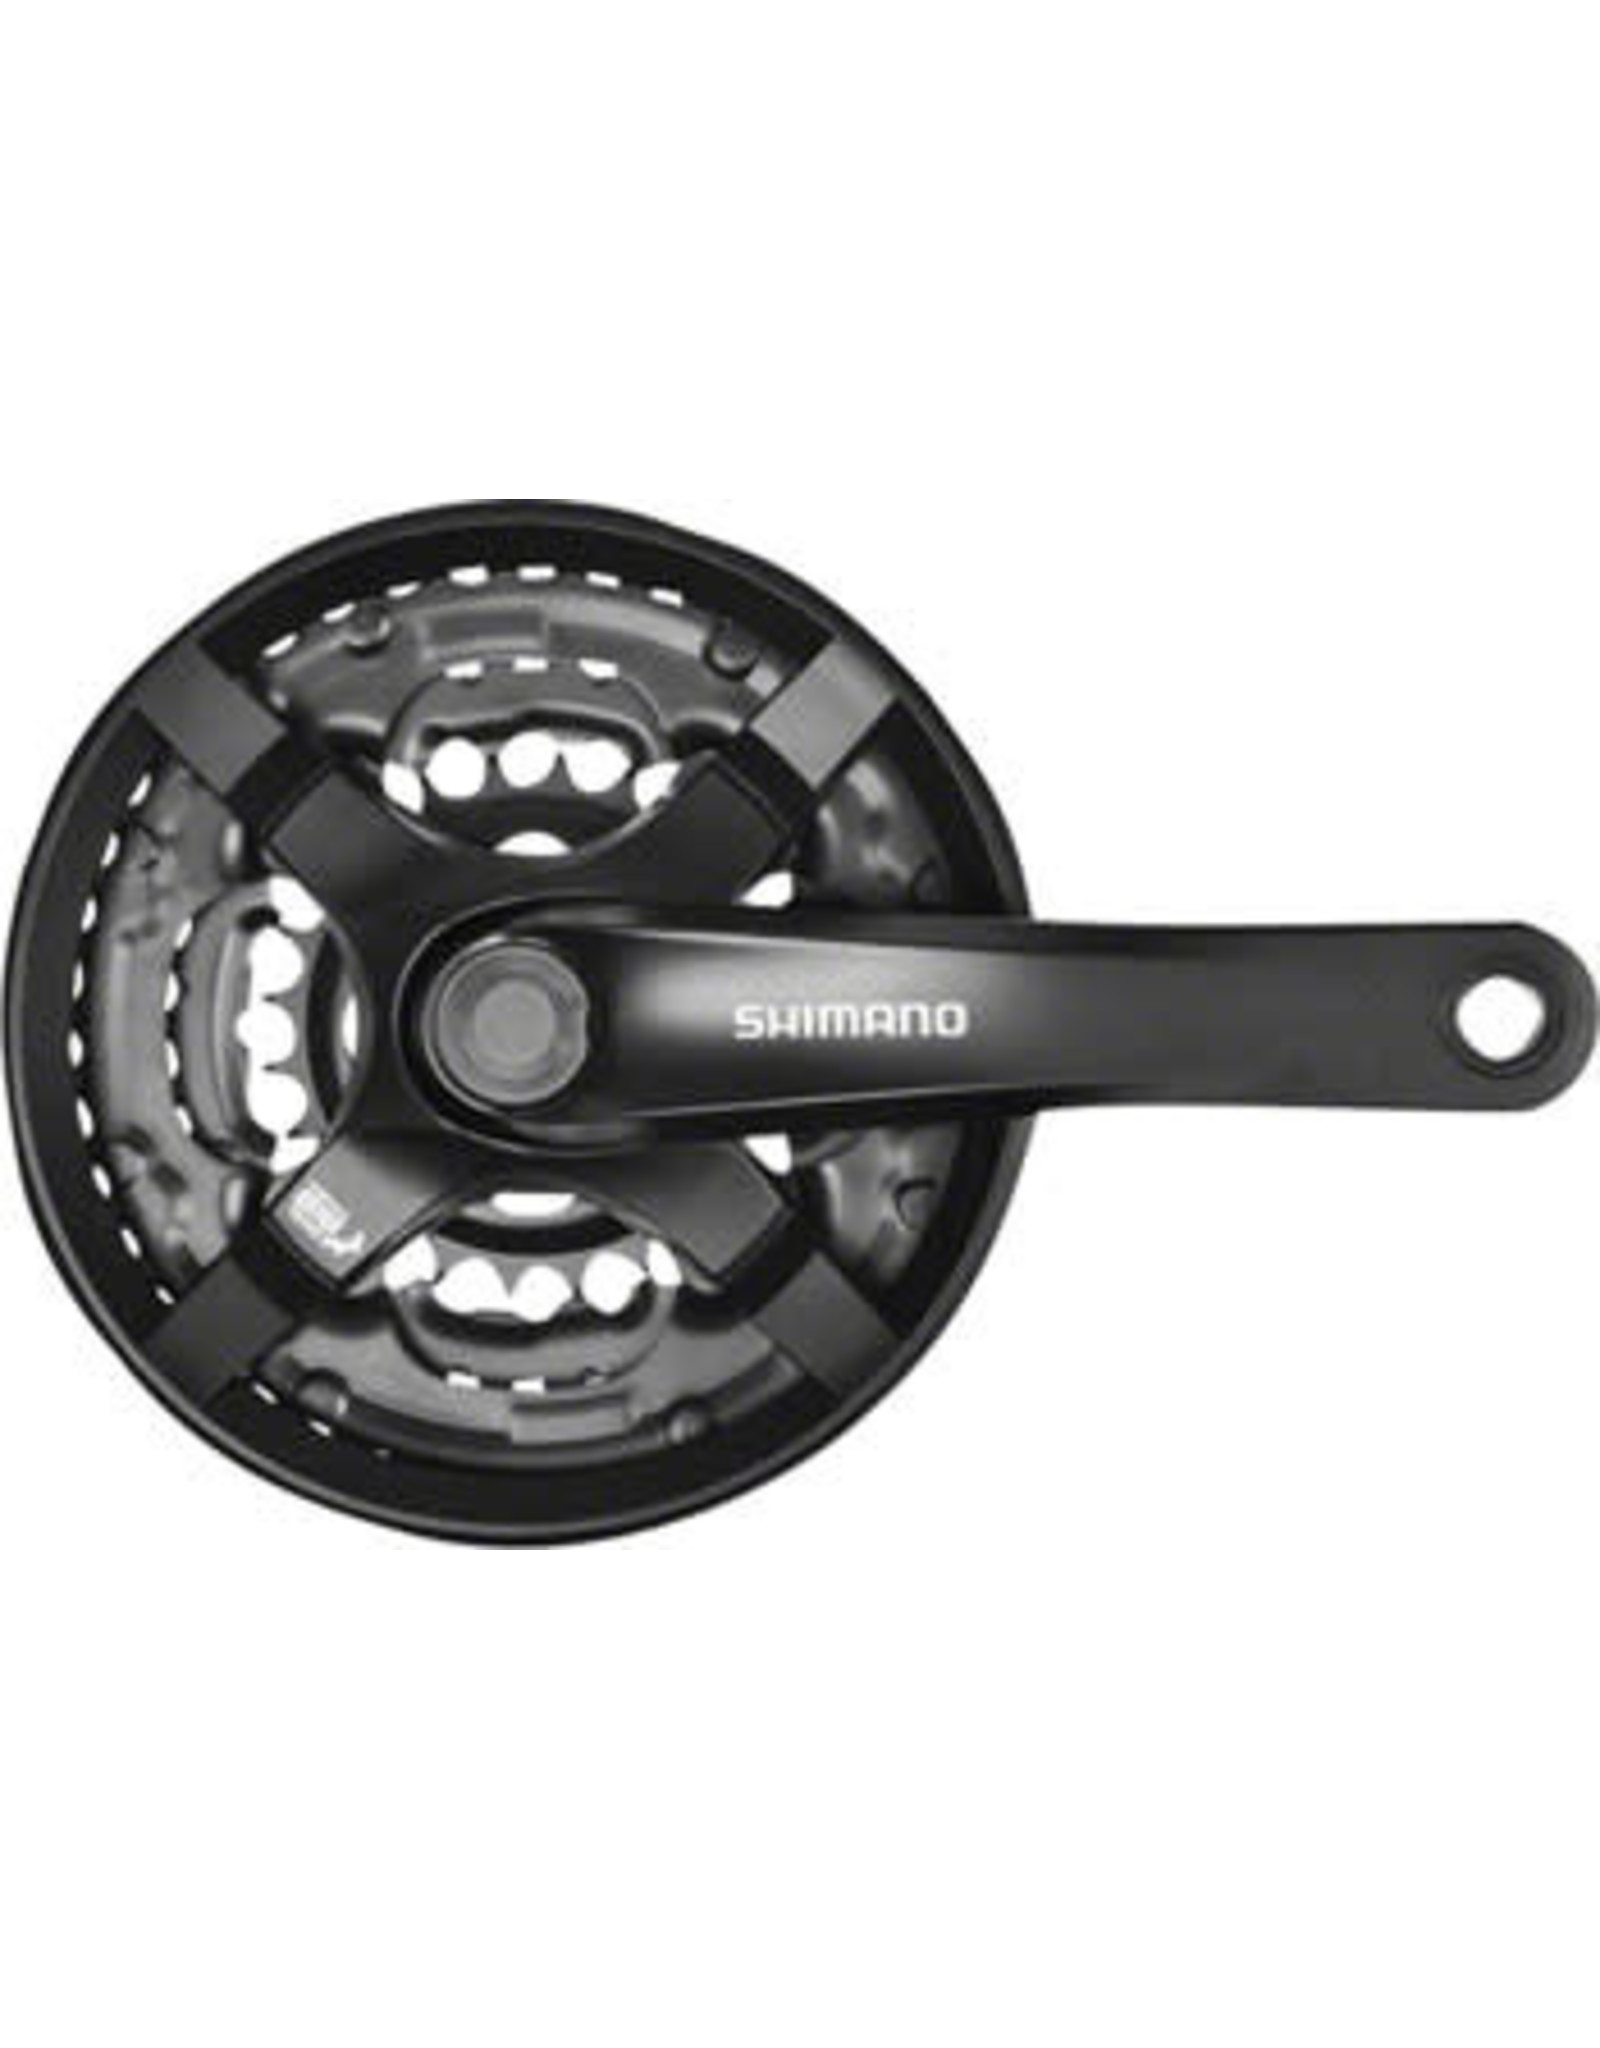 Shimano Shimano Tourney FC-TY501 Crankset - 175mm, 6/7/8-Speed, 42/34/24t, Riveted, Square Taper JIS Spindle Interface, Black